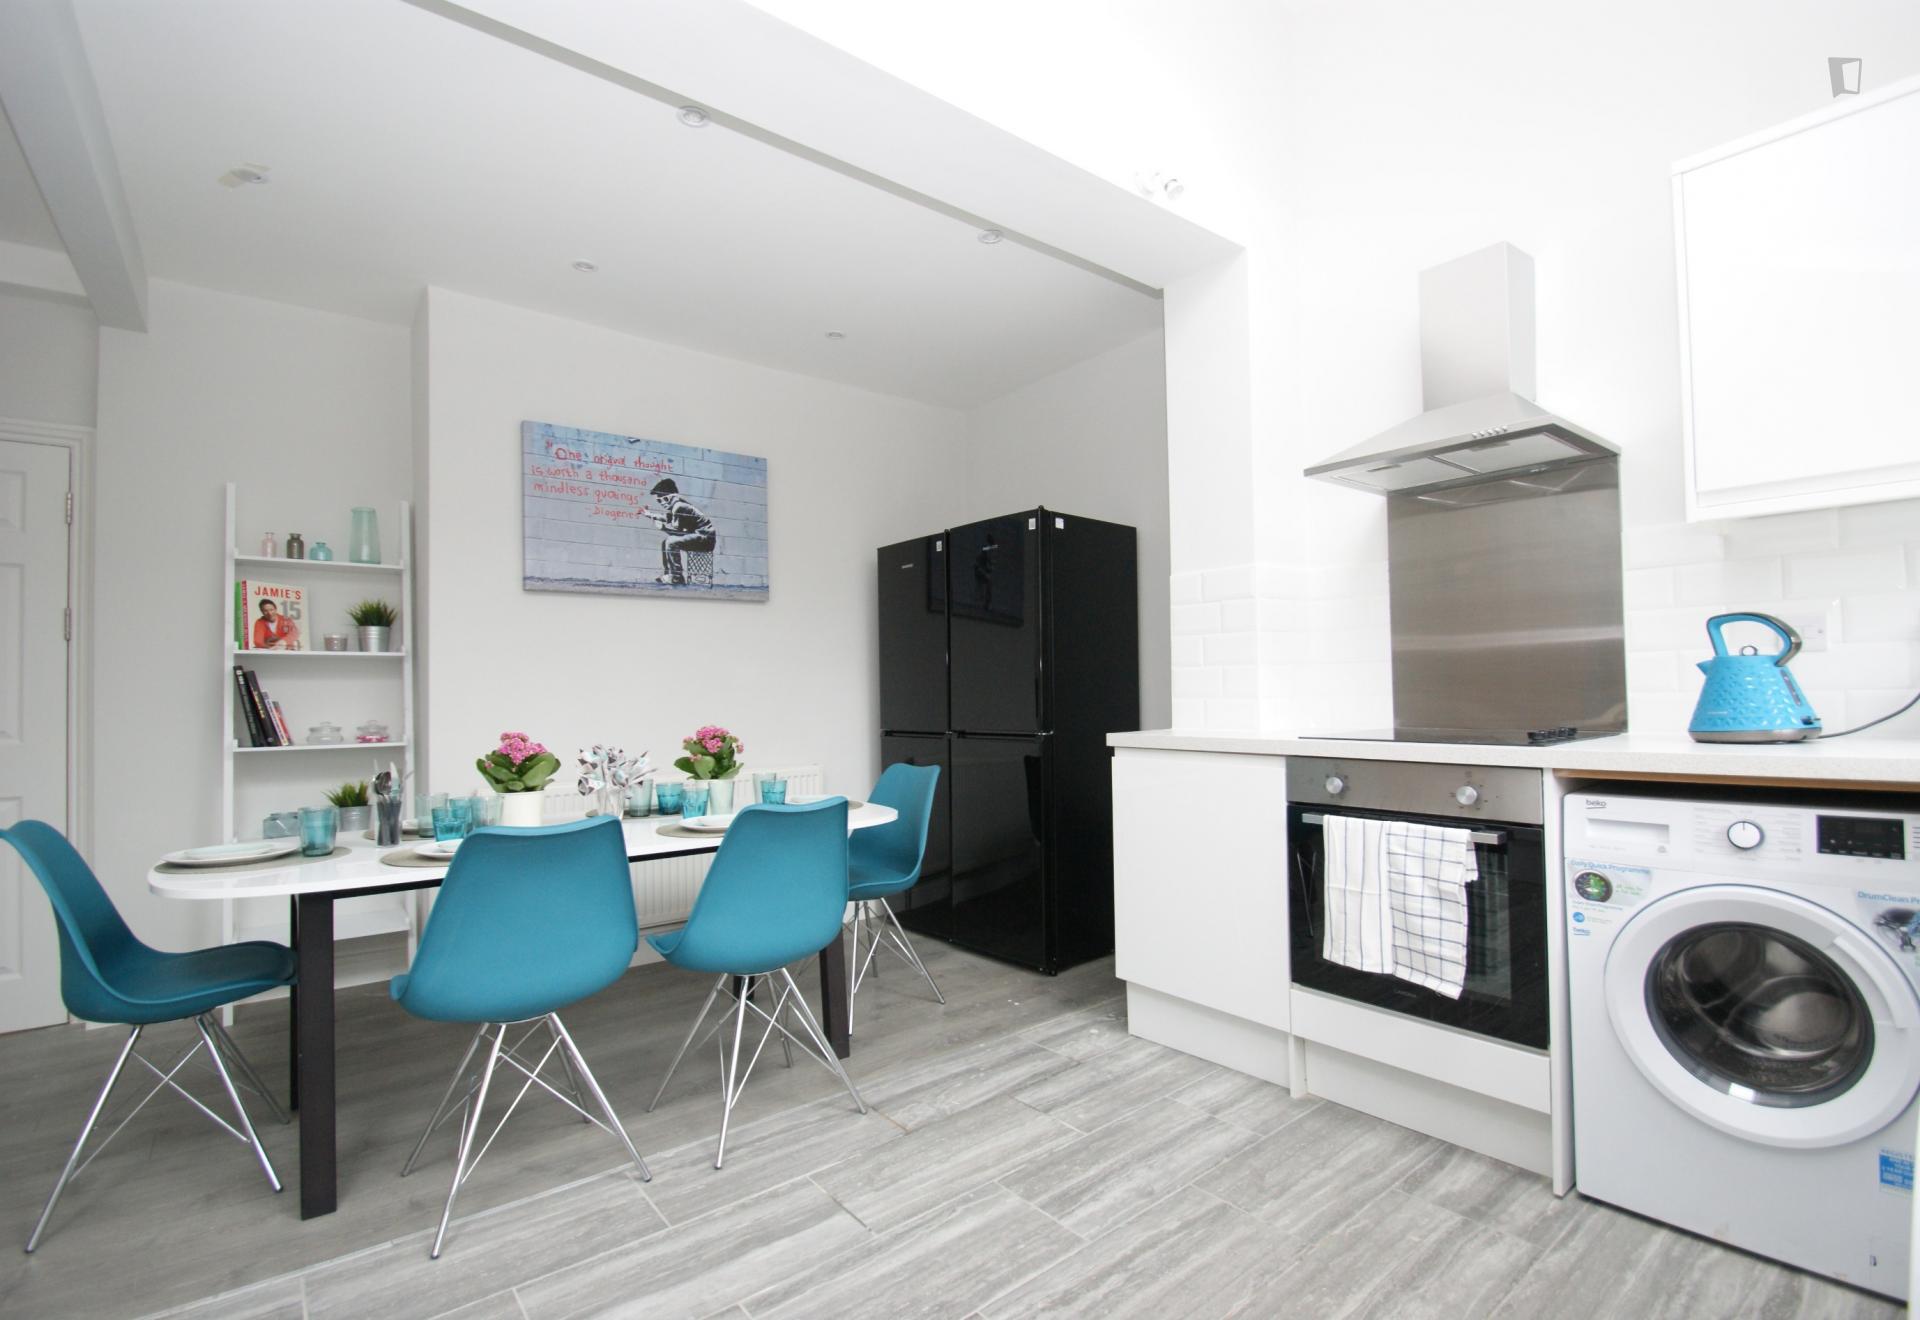 Terrick - Shared apartment for expats in London